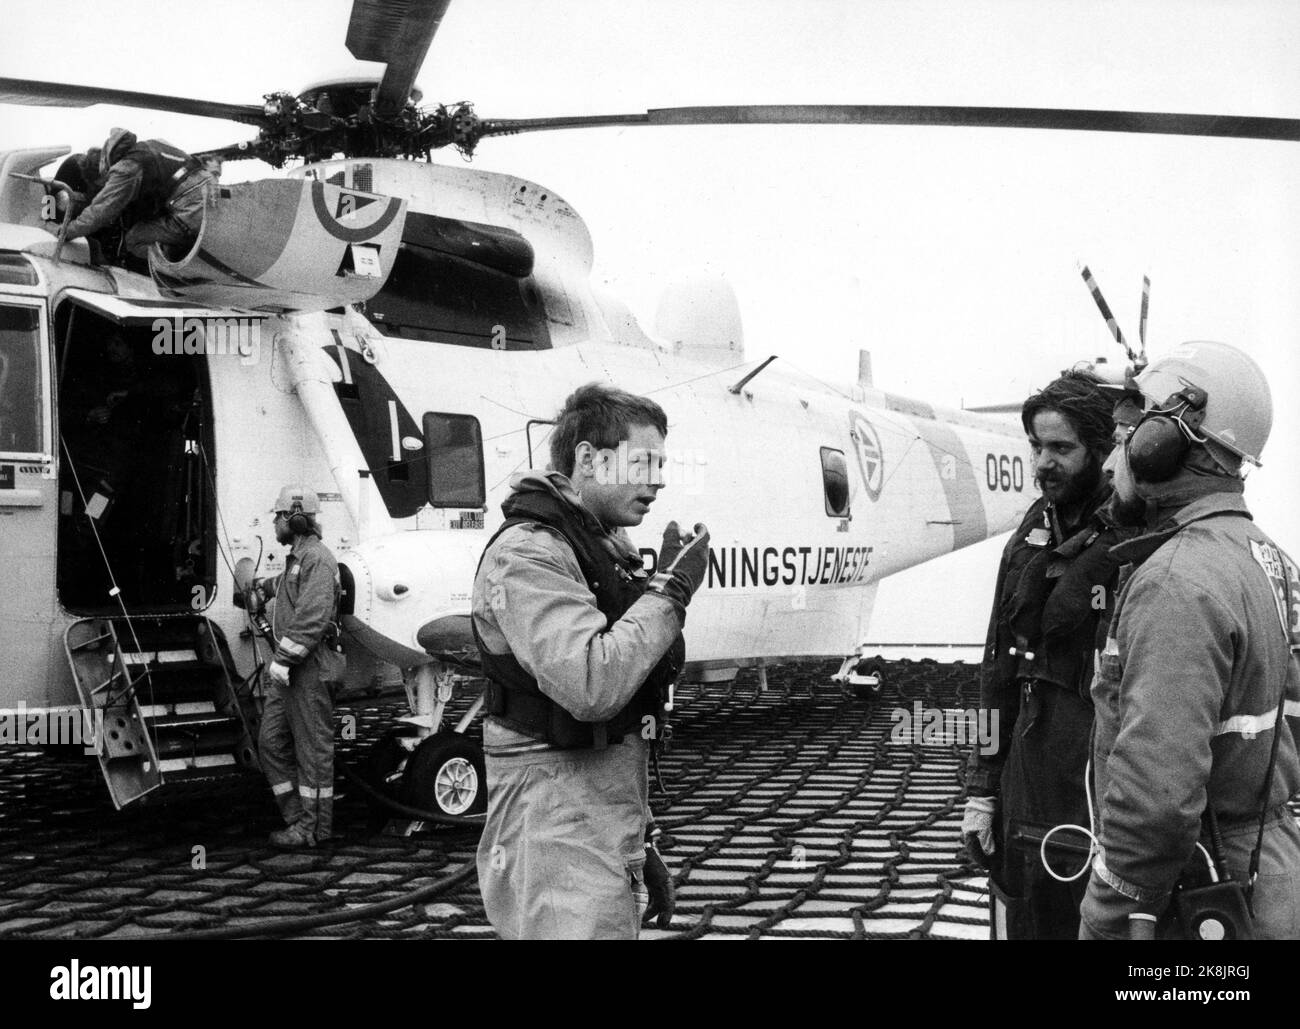 North Sea 19800329. The rescue operation after the roofing of the housing platform Alexander Kielland on March 27, 1980, with 122 people perished. Rescue crews and rescue equipment have been put on a hard test in recent days. Here is one of the helicopters during a quick inspection and refueling of fuel, while the crew gets a little rest and talk. L 11034 / D Photo: NTB archive / NTB Stock Photo